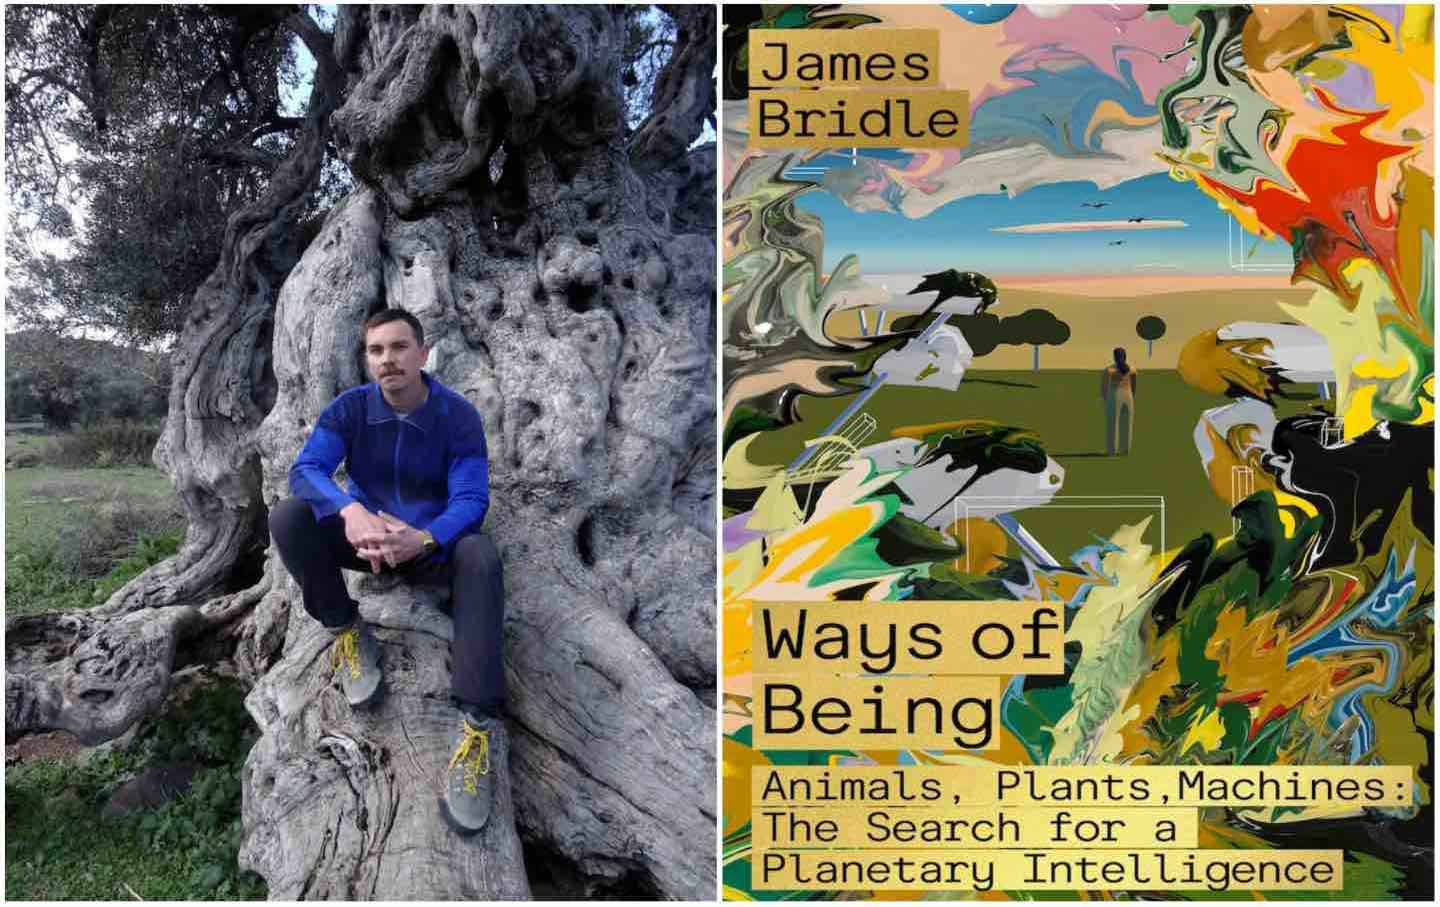 James Bridle’s Dream of a Cybernetic Forest